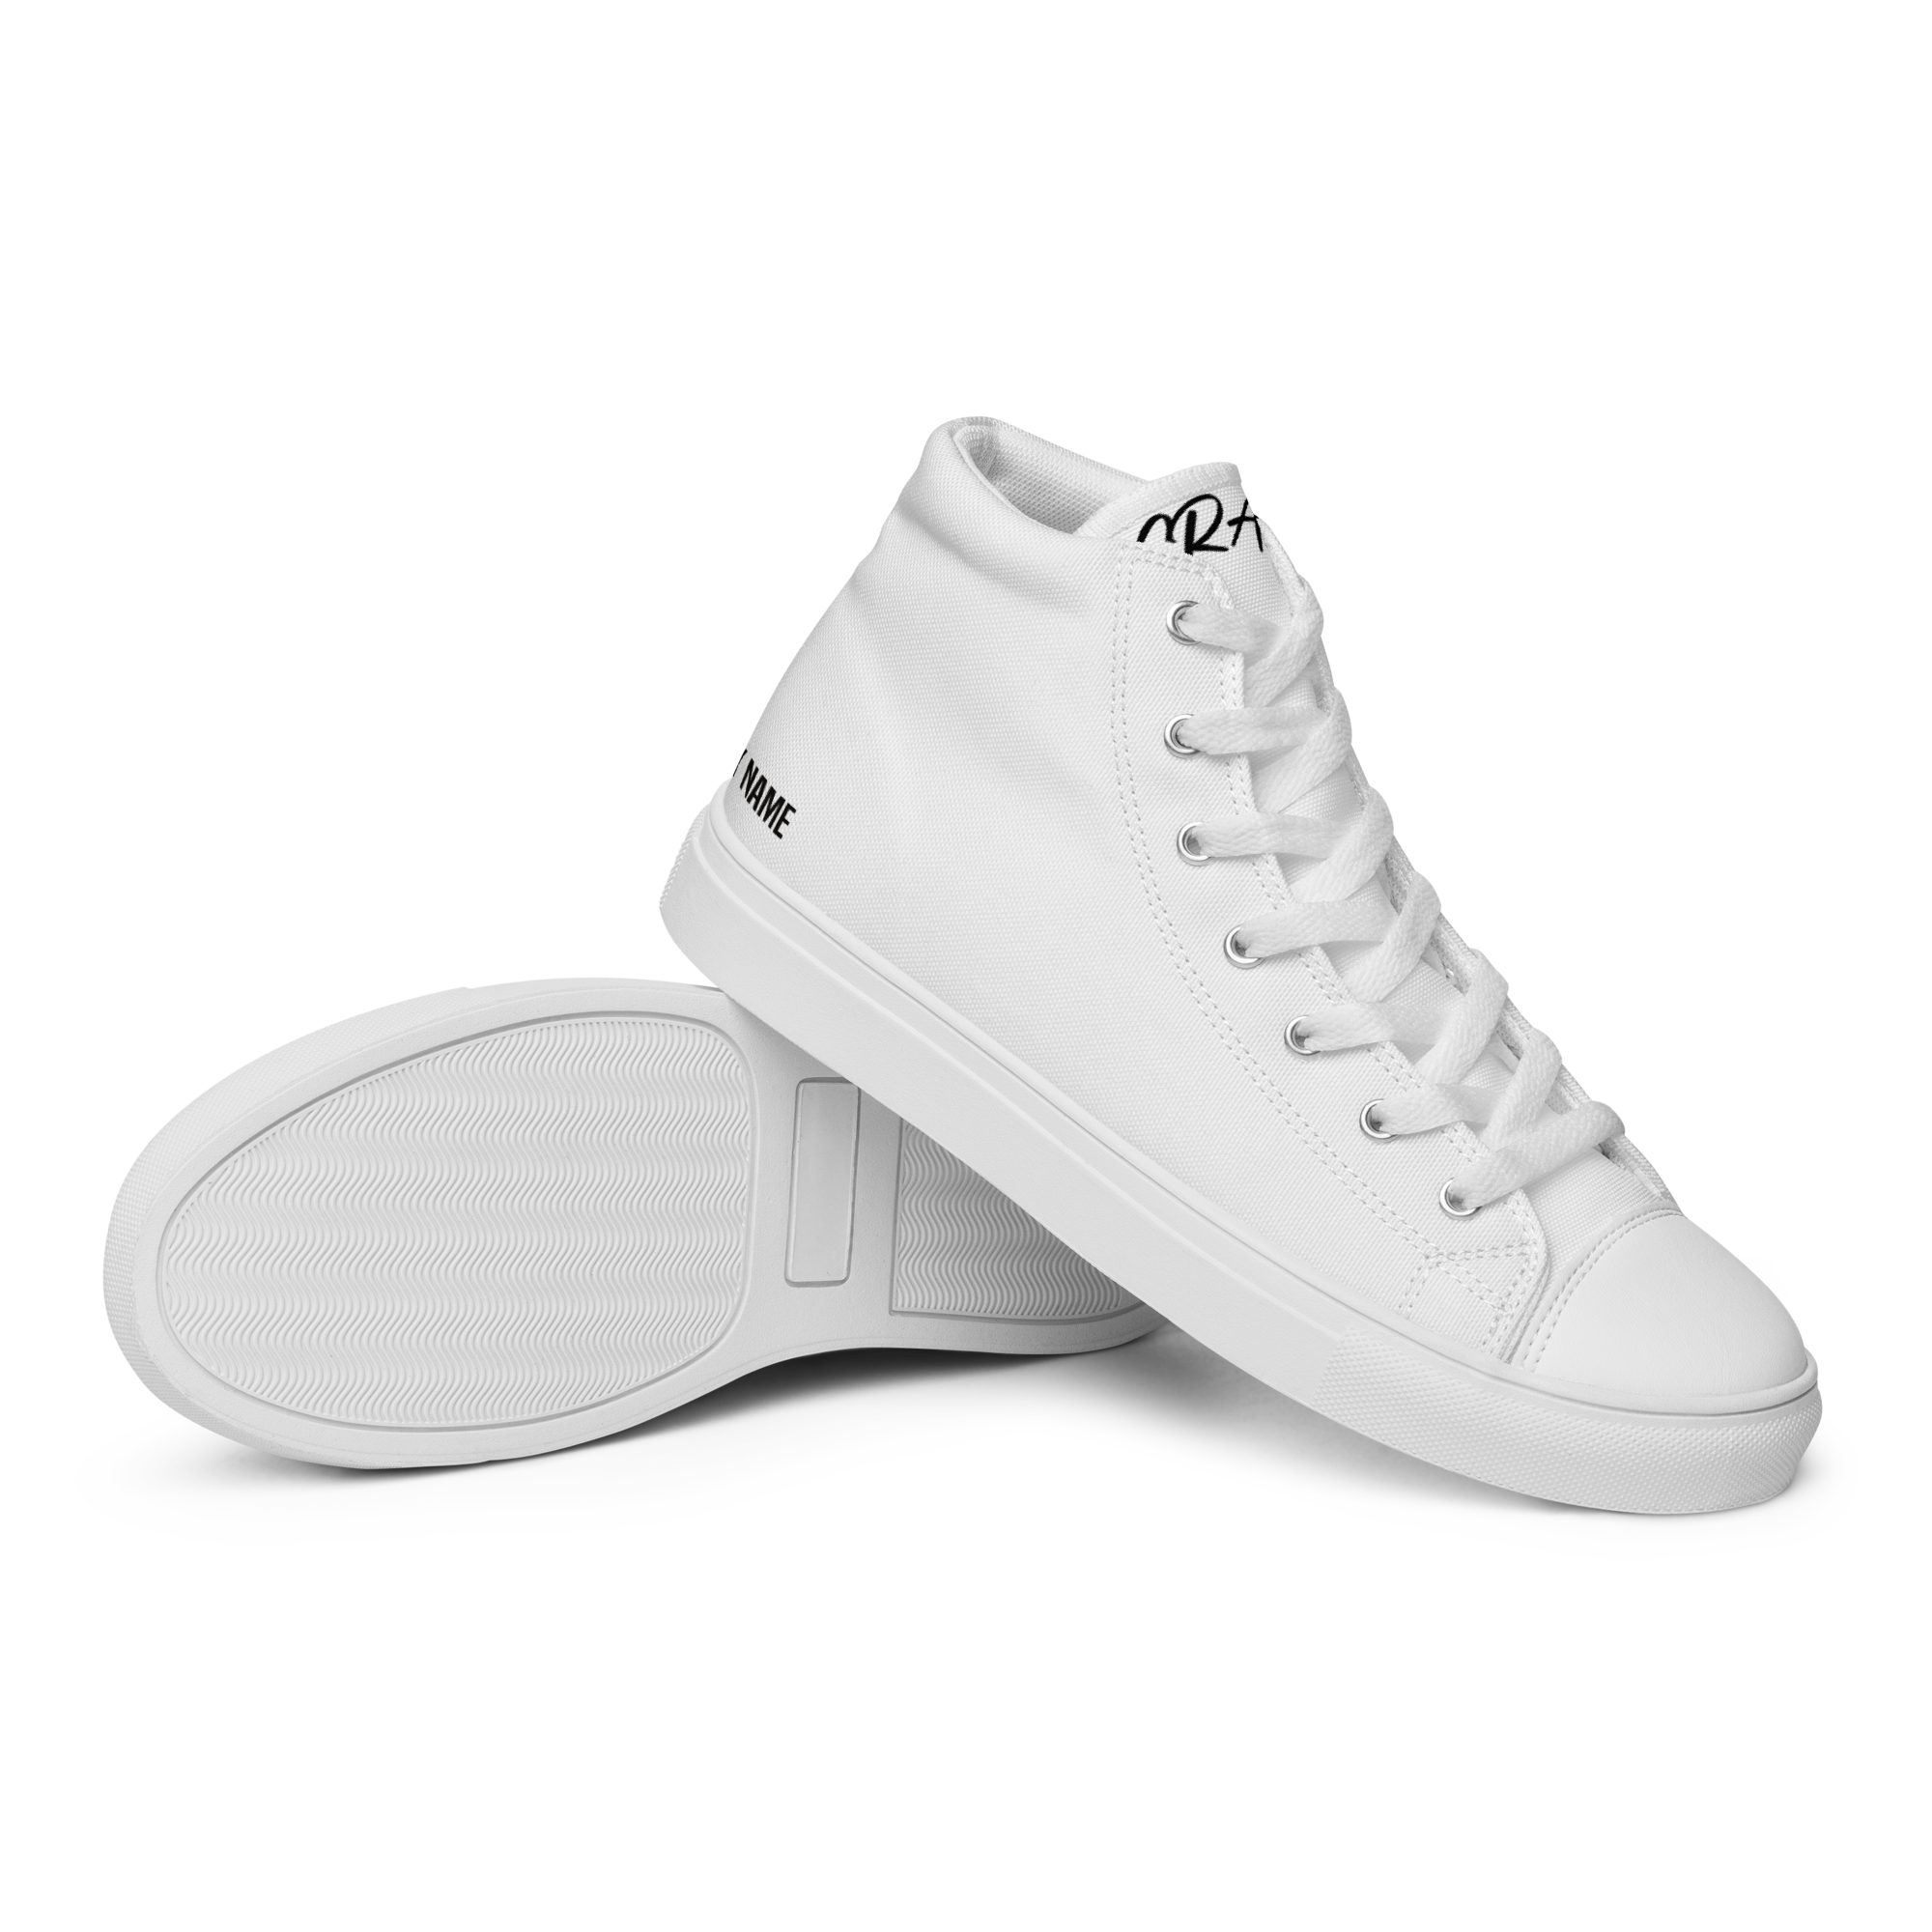 "SAY MY NAME" women's high white canvas sneakers